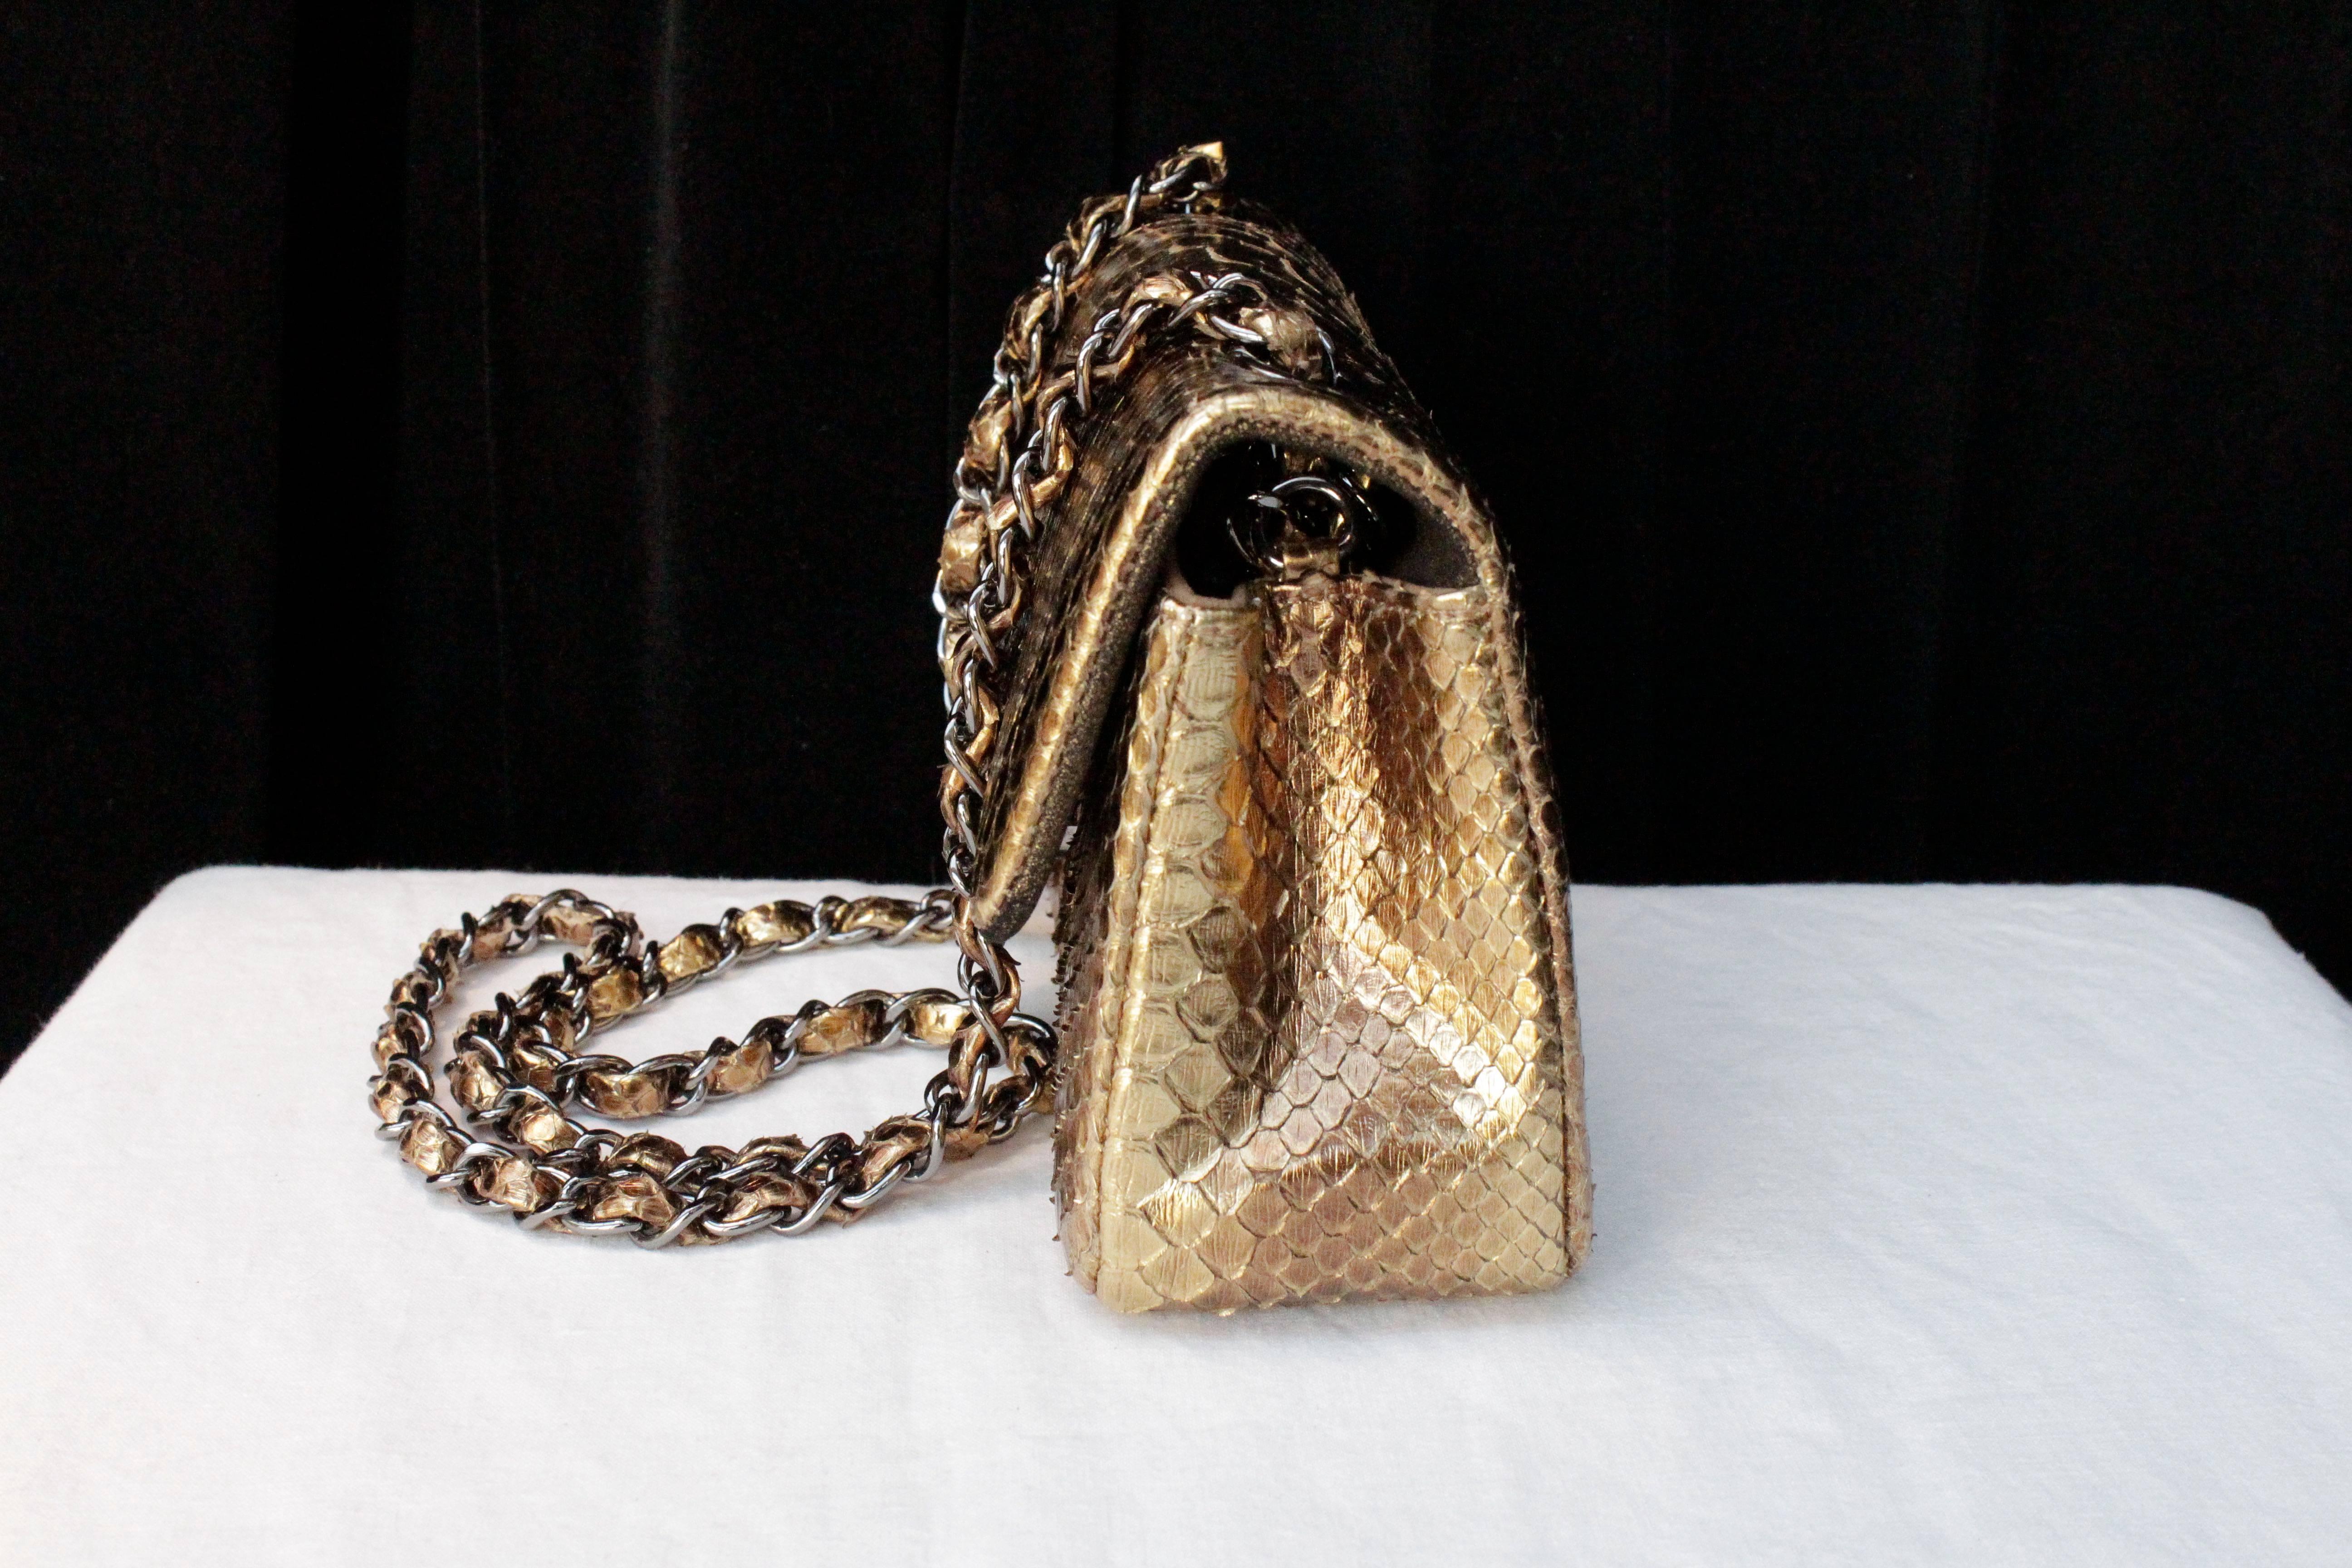 Women's or Men's 2000s Chanel Mini Timeless bag in Gold Tone Snakeskin and Silvered Hardware